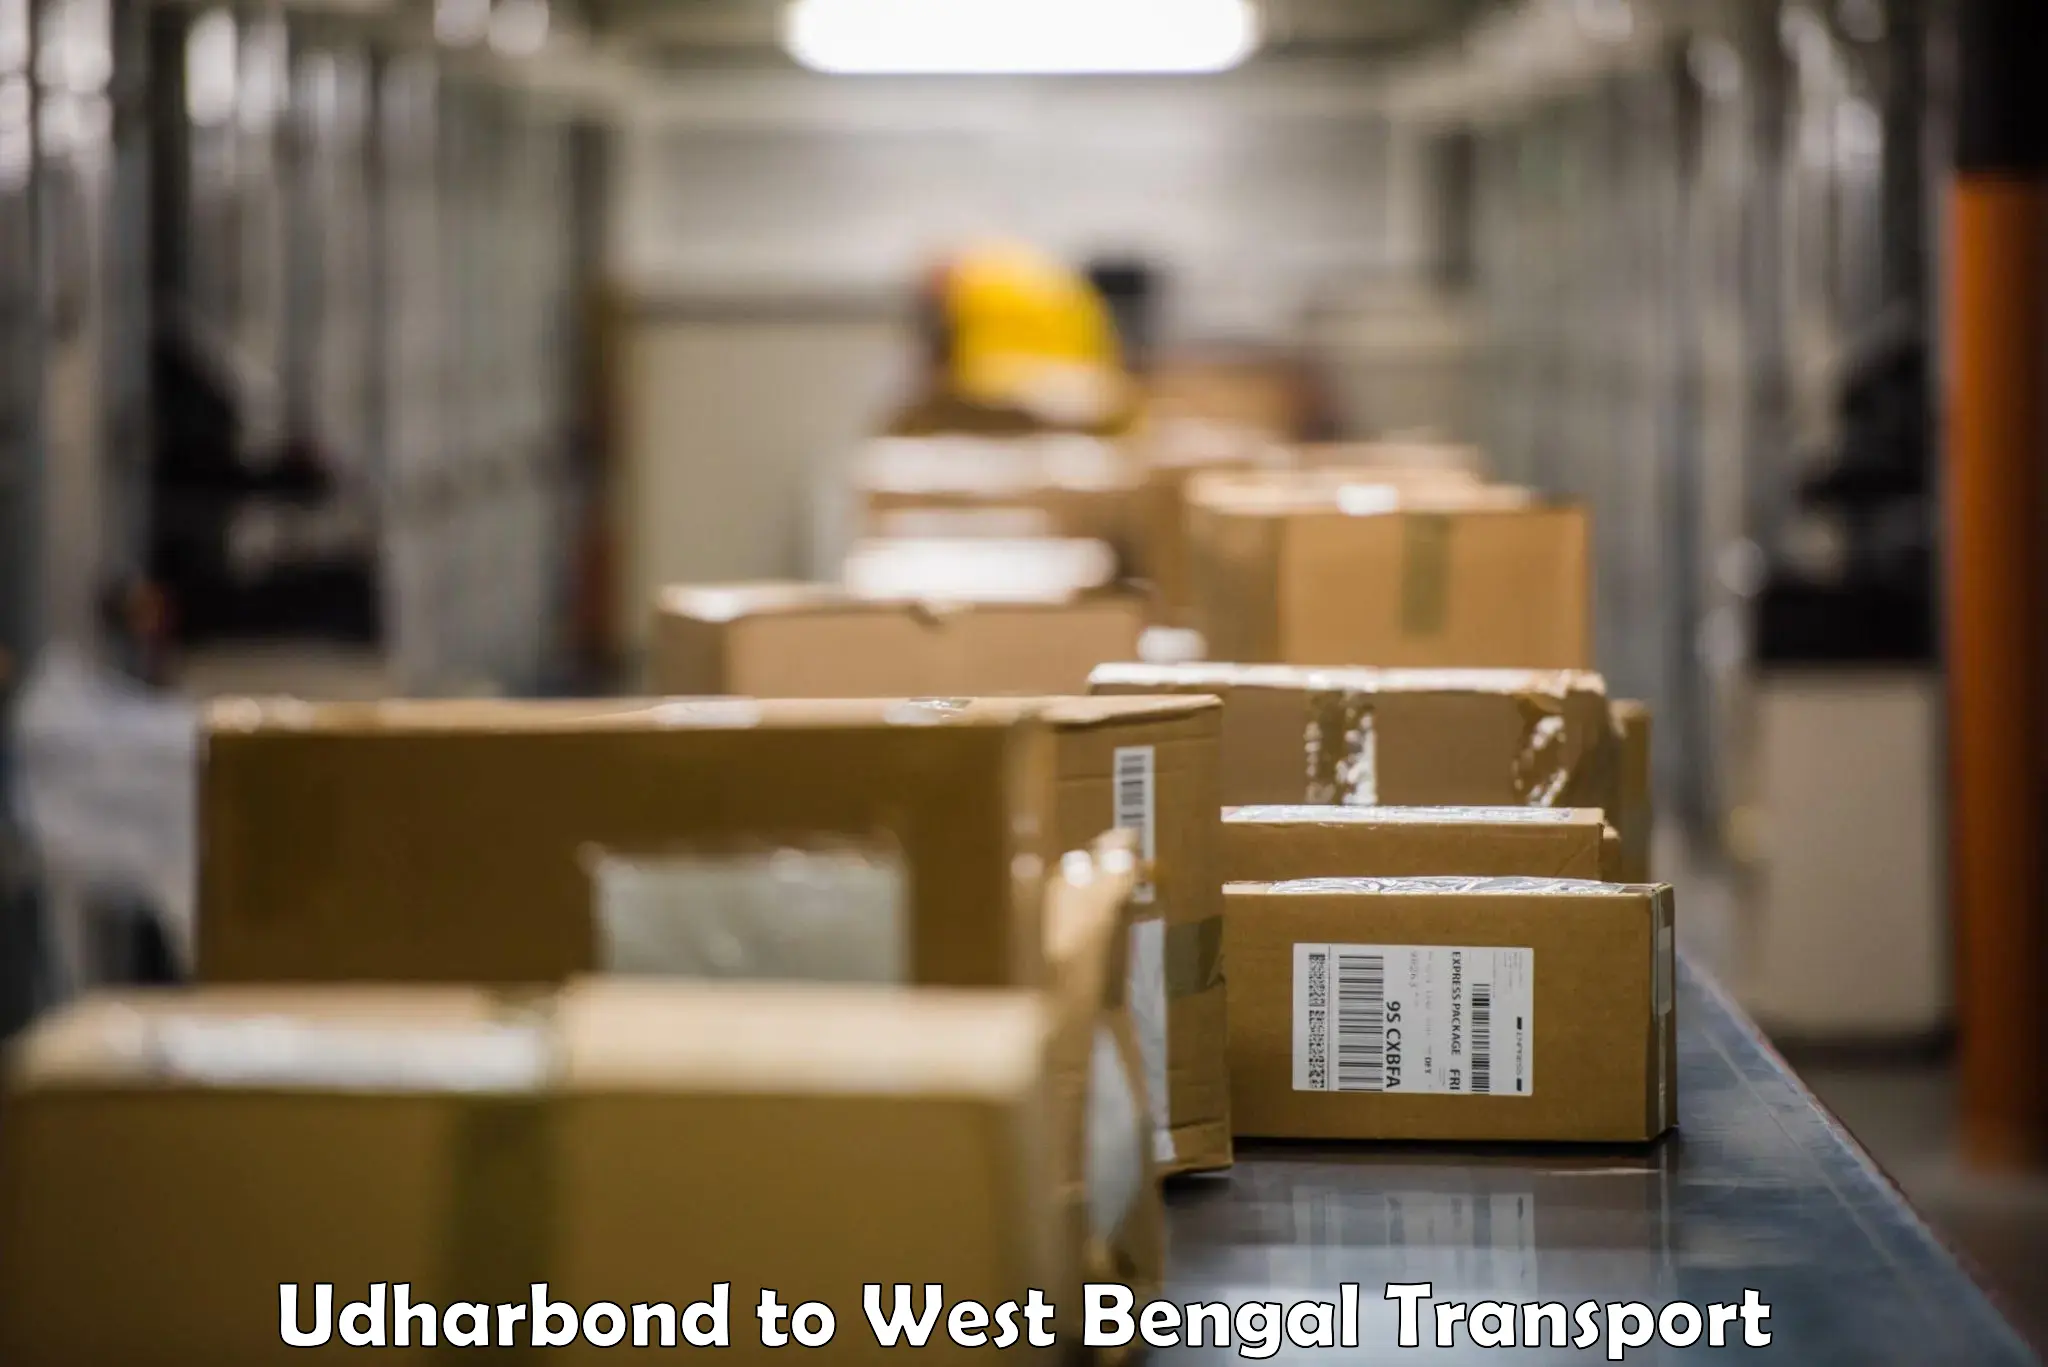 Delivery service Udharbond to West Bengal